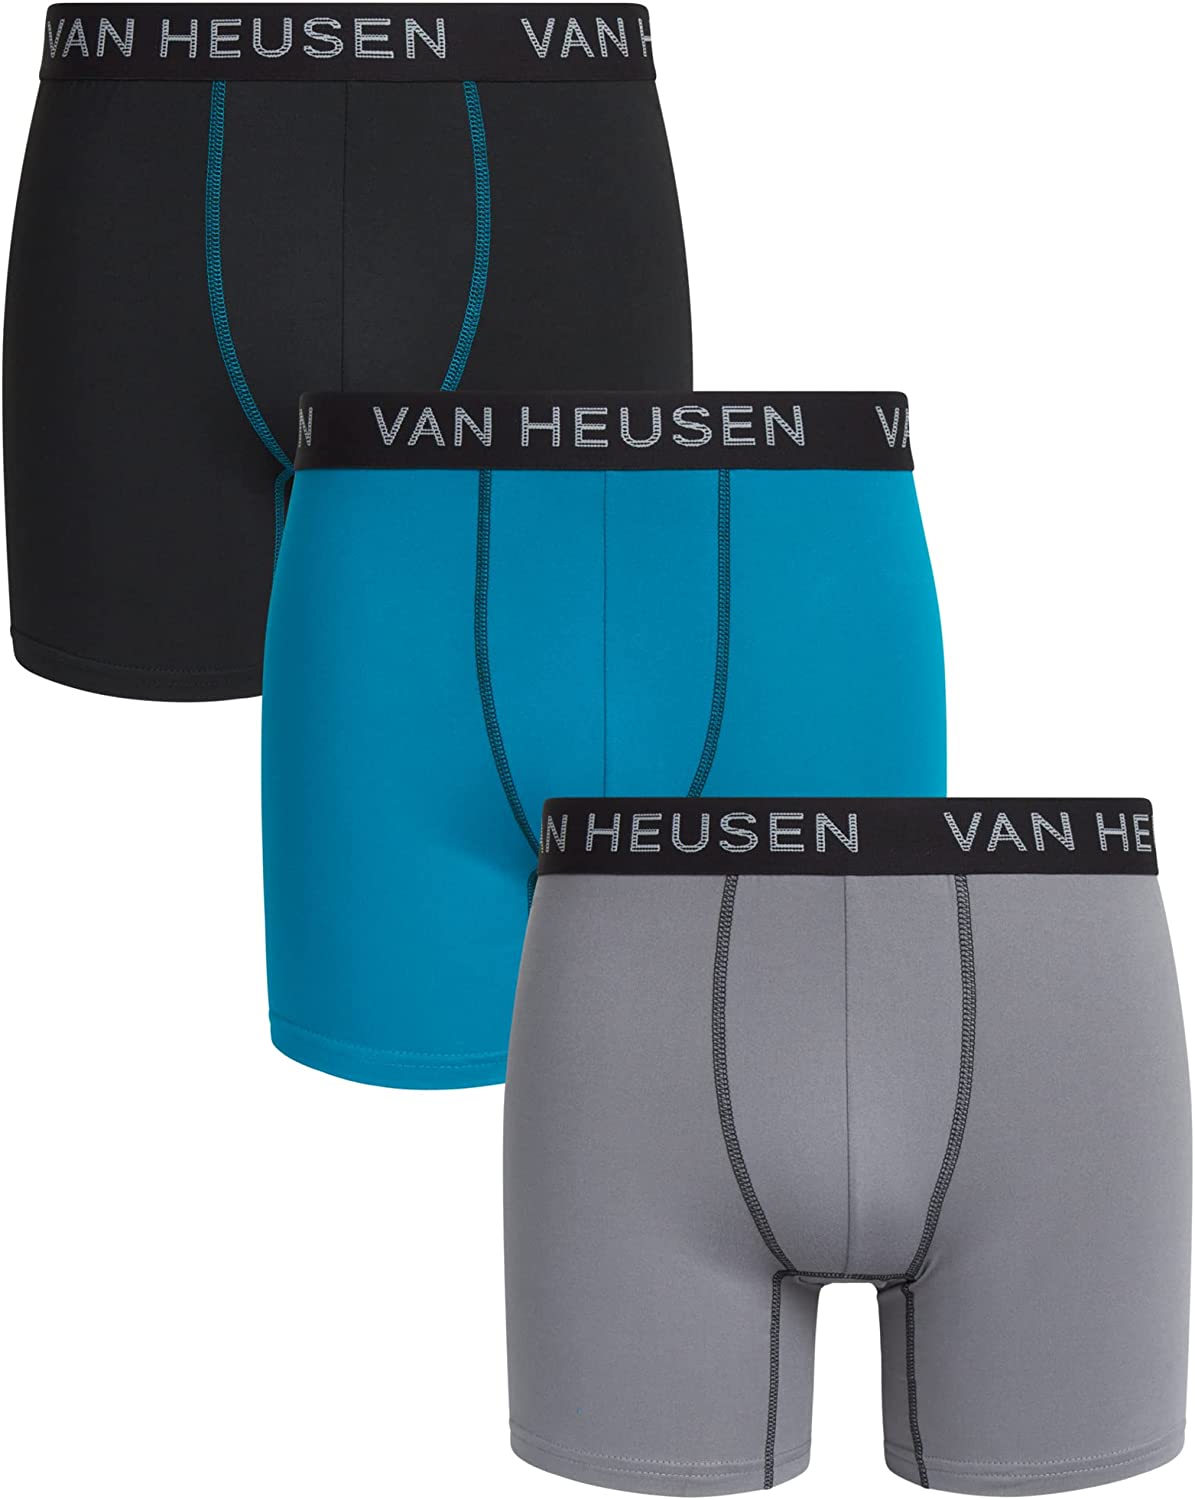 Van Heusen Men's Underwear - Casual Stretch Boxer Briefs with Contour Pouch  (3 Pack), Size Small, Black/Charcoal Grey/Red at  Men's Clothing store